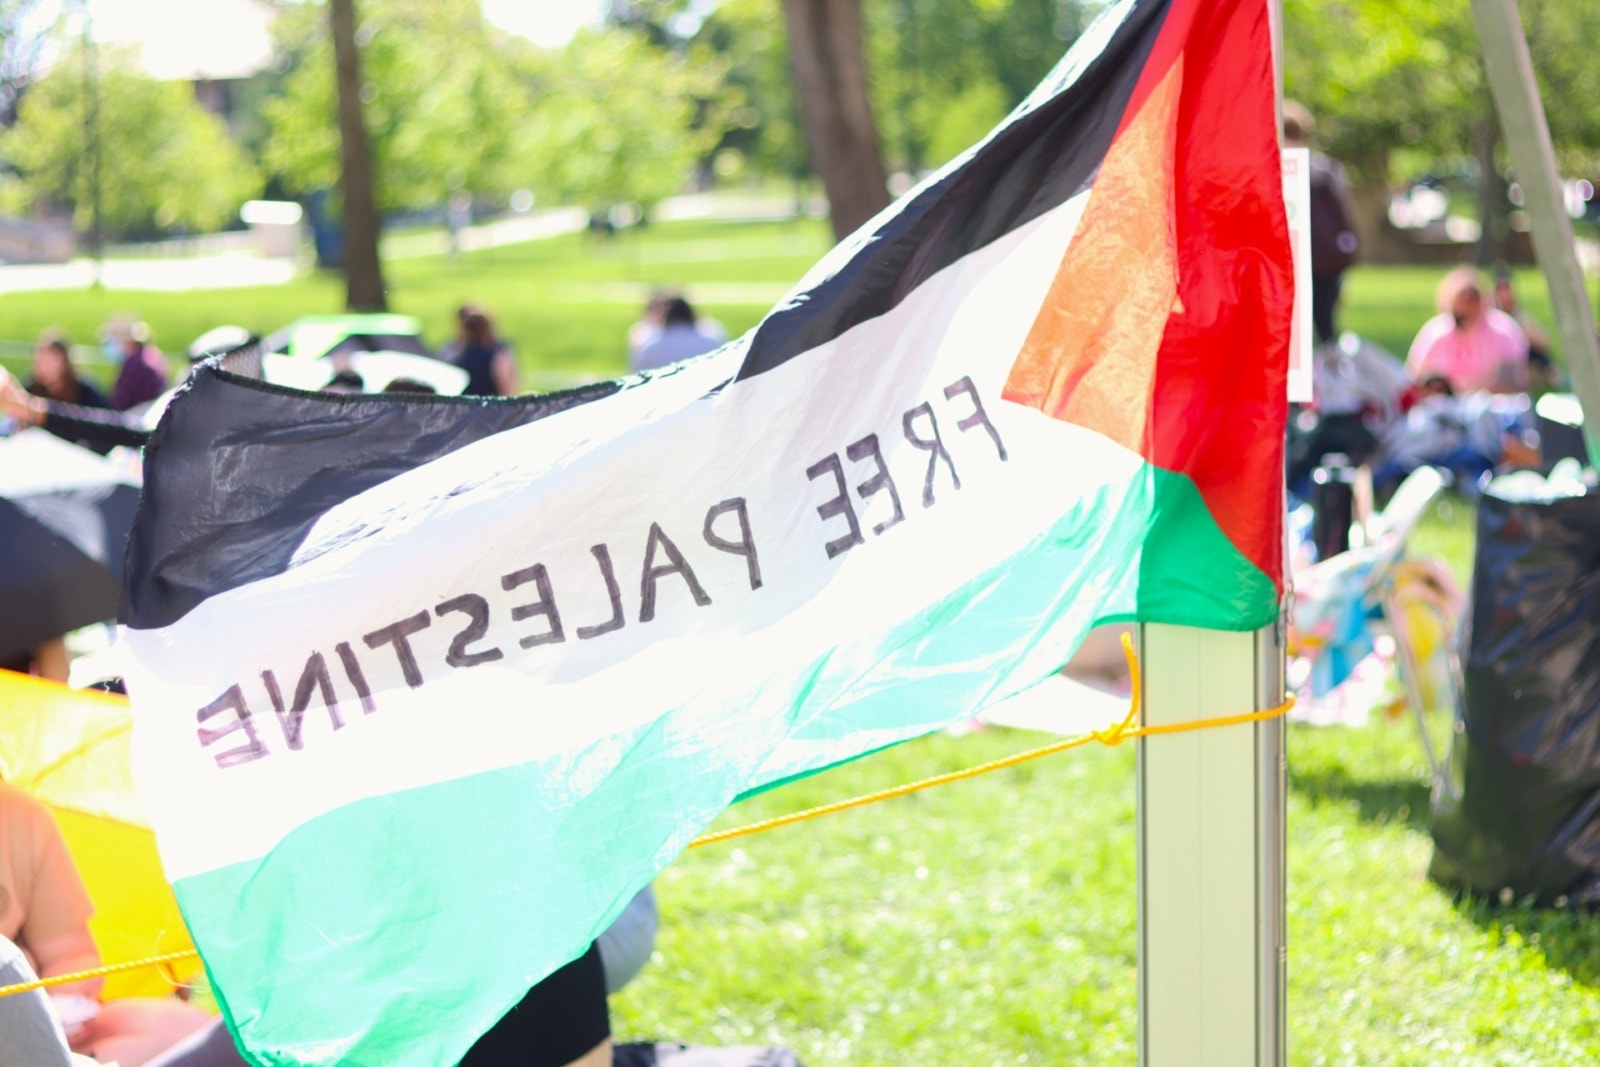 A Palestinian flag is tied to a pole and waves in the wind in front of a group of students sitting on the grass. the flag reads "free Palestine"